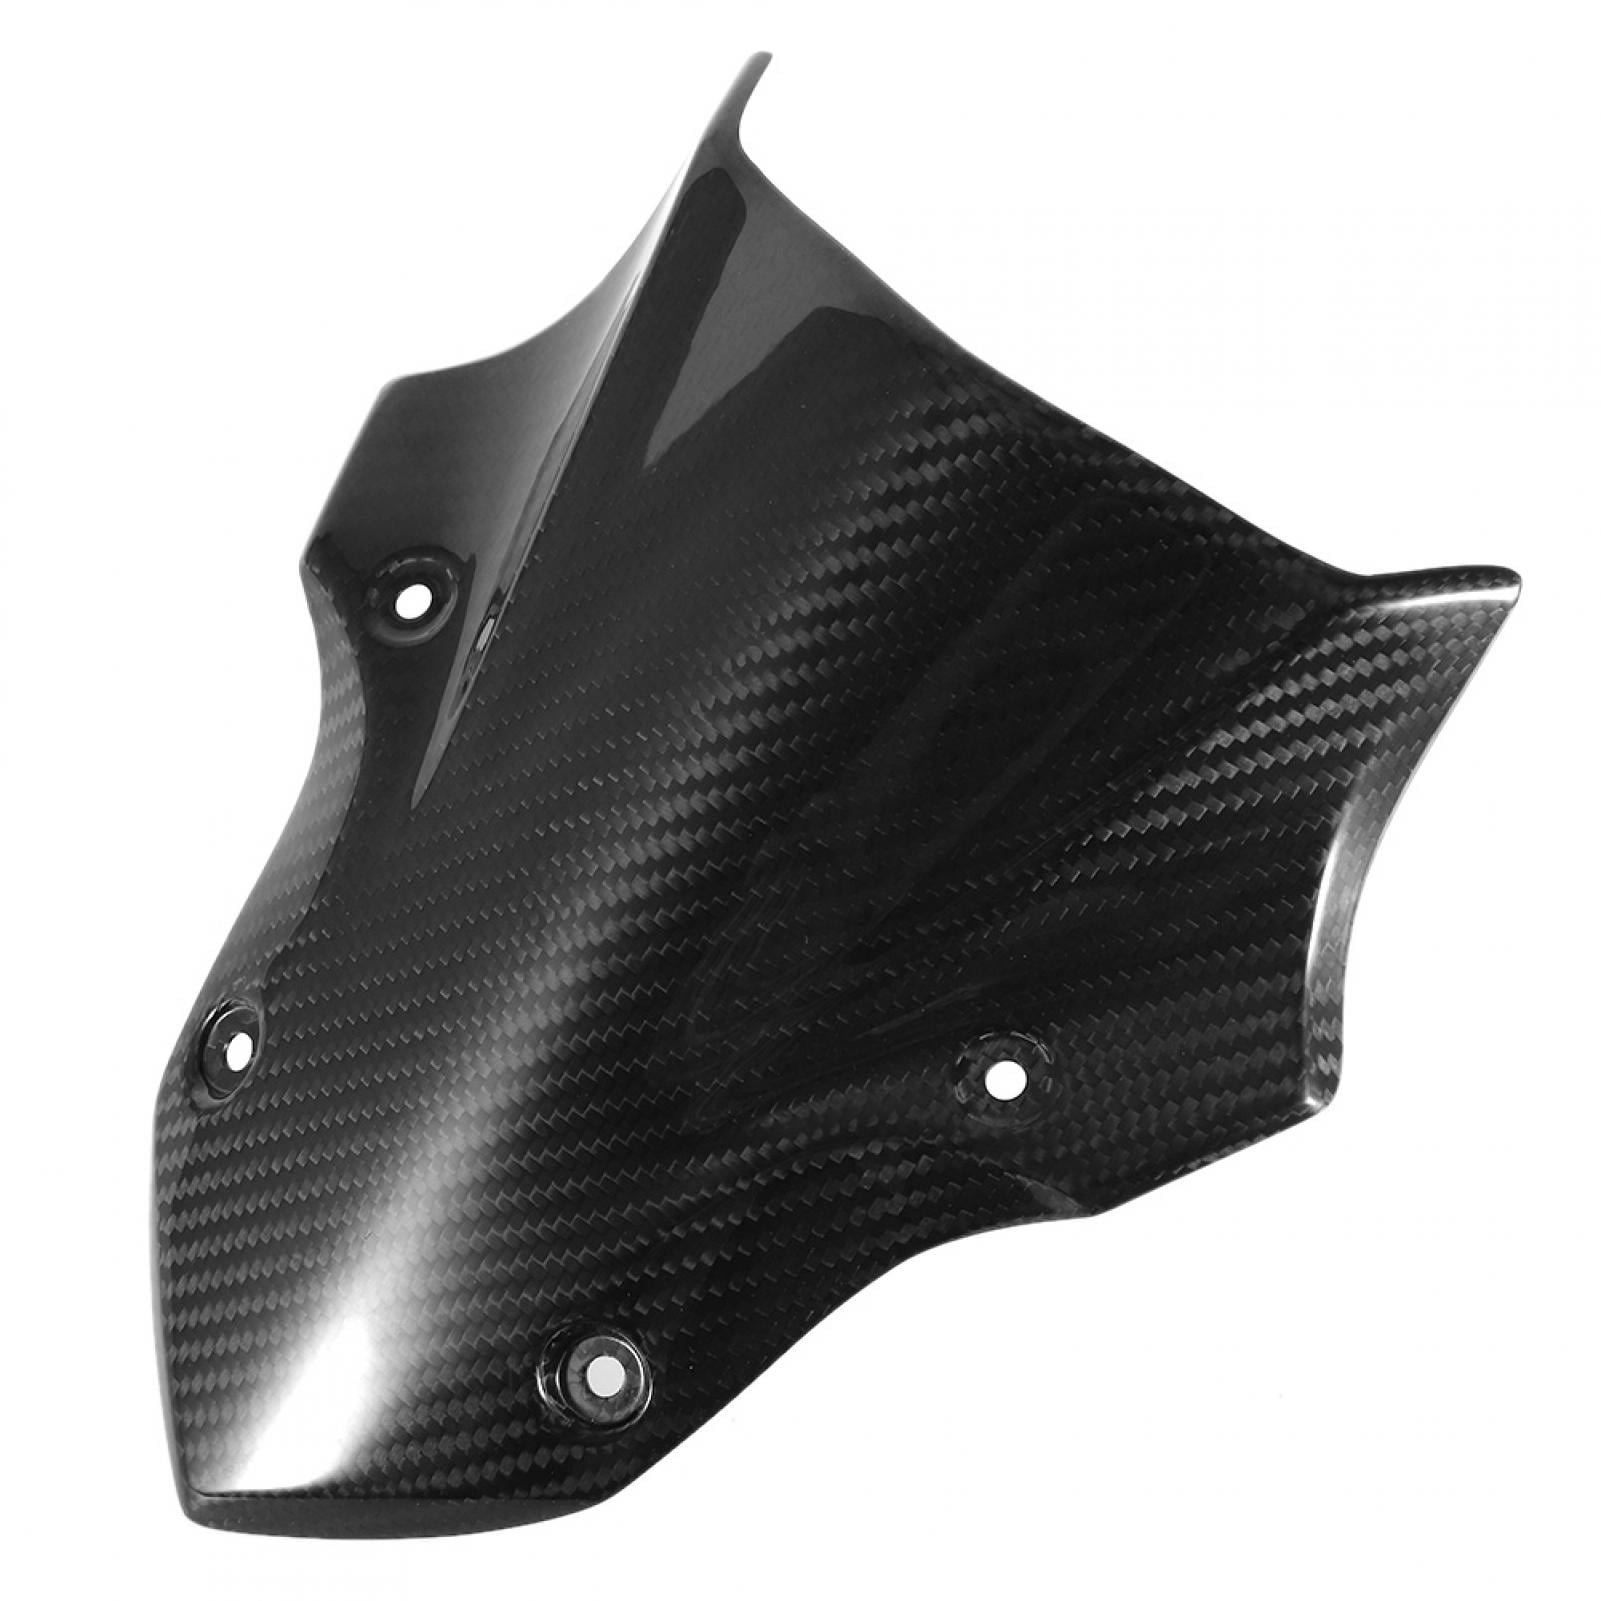 Carbon Fiber Windscreen Shield Cowl Fairings Cover Motorcycle Conversion for Z900 2017+ Qiilu Motorcycles Windshield Motorcycles Windshield